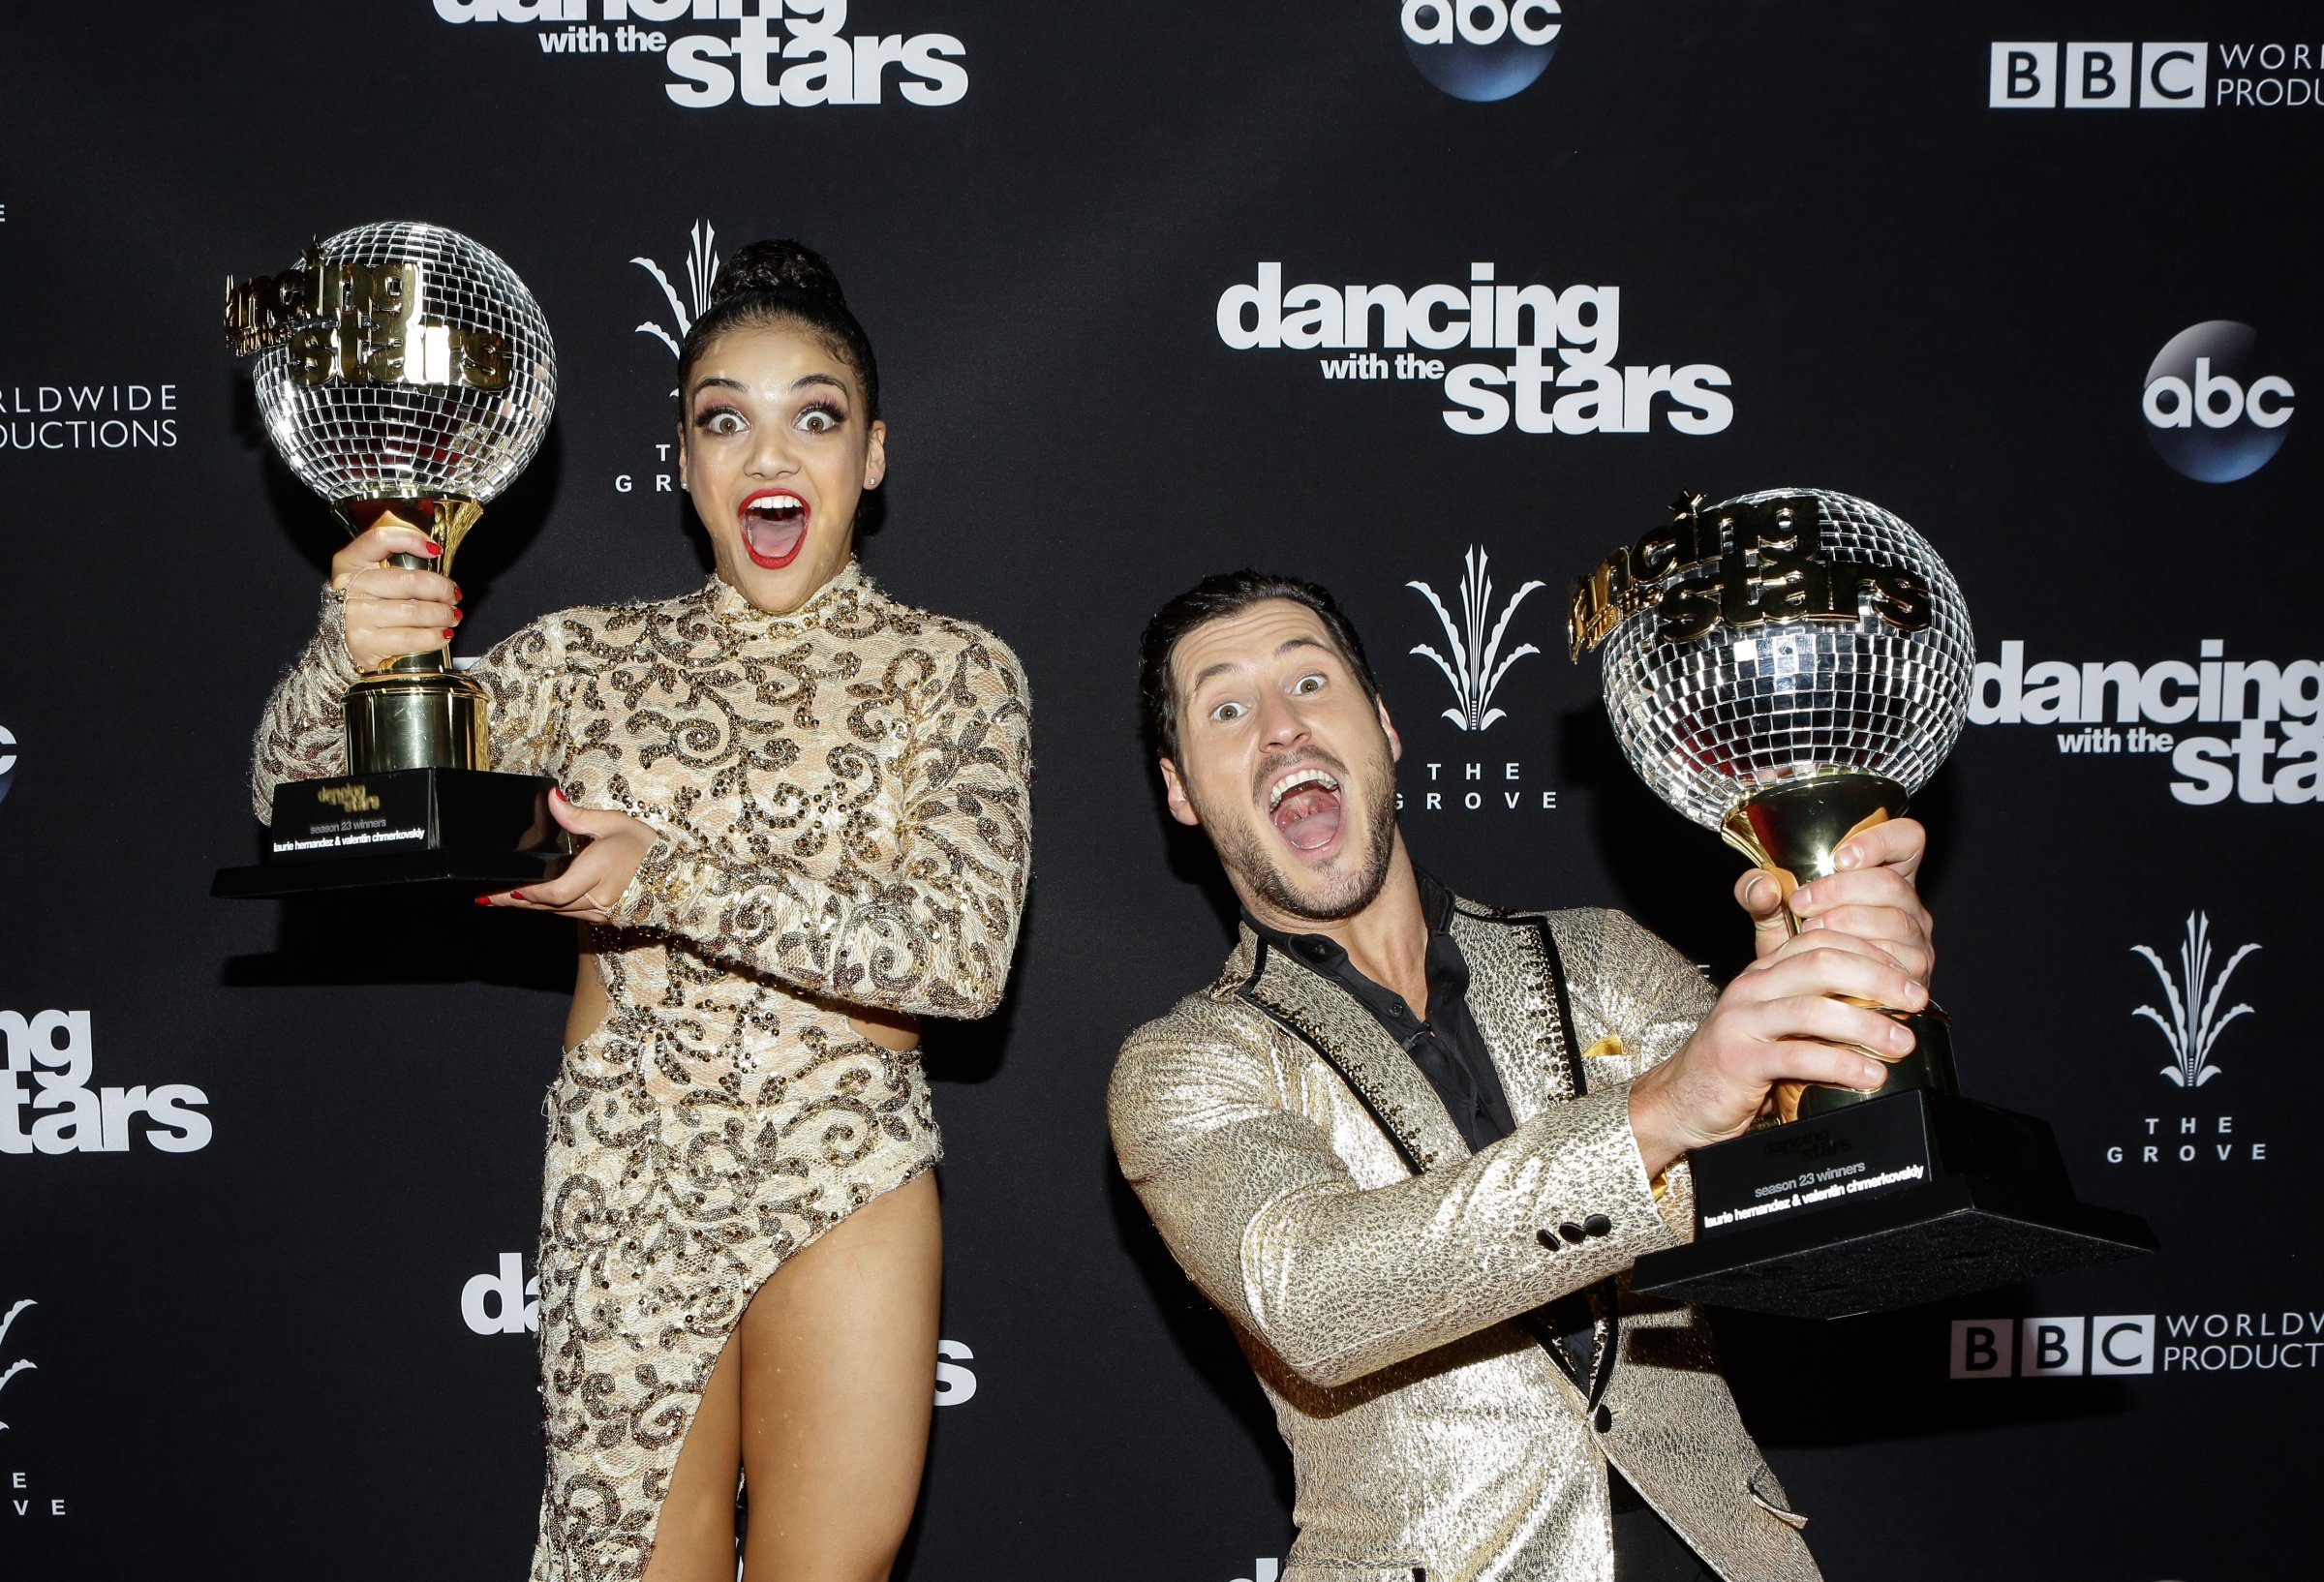 The Grove Hosts "Dancing With The Stars" Live Finale